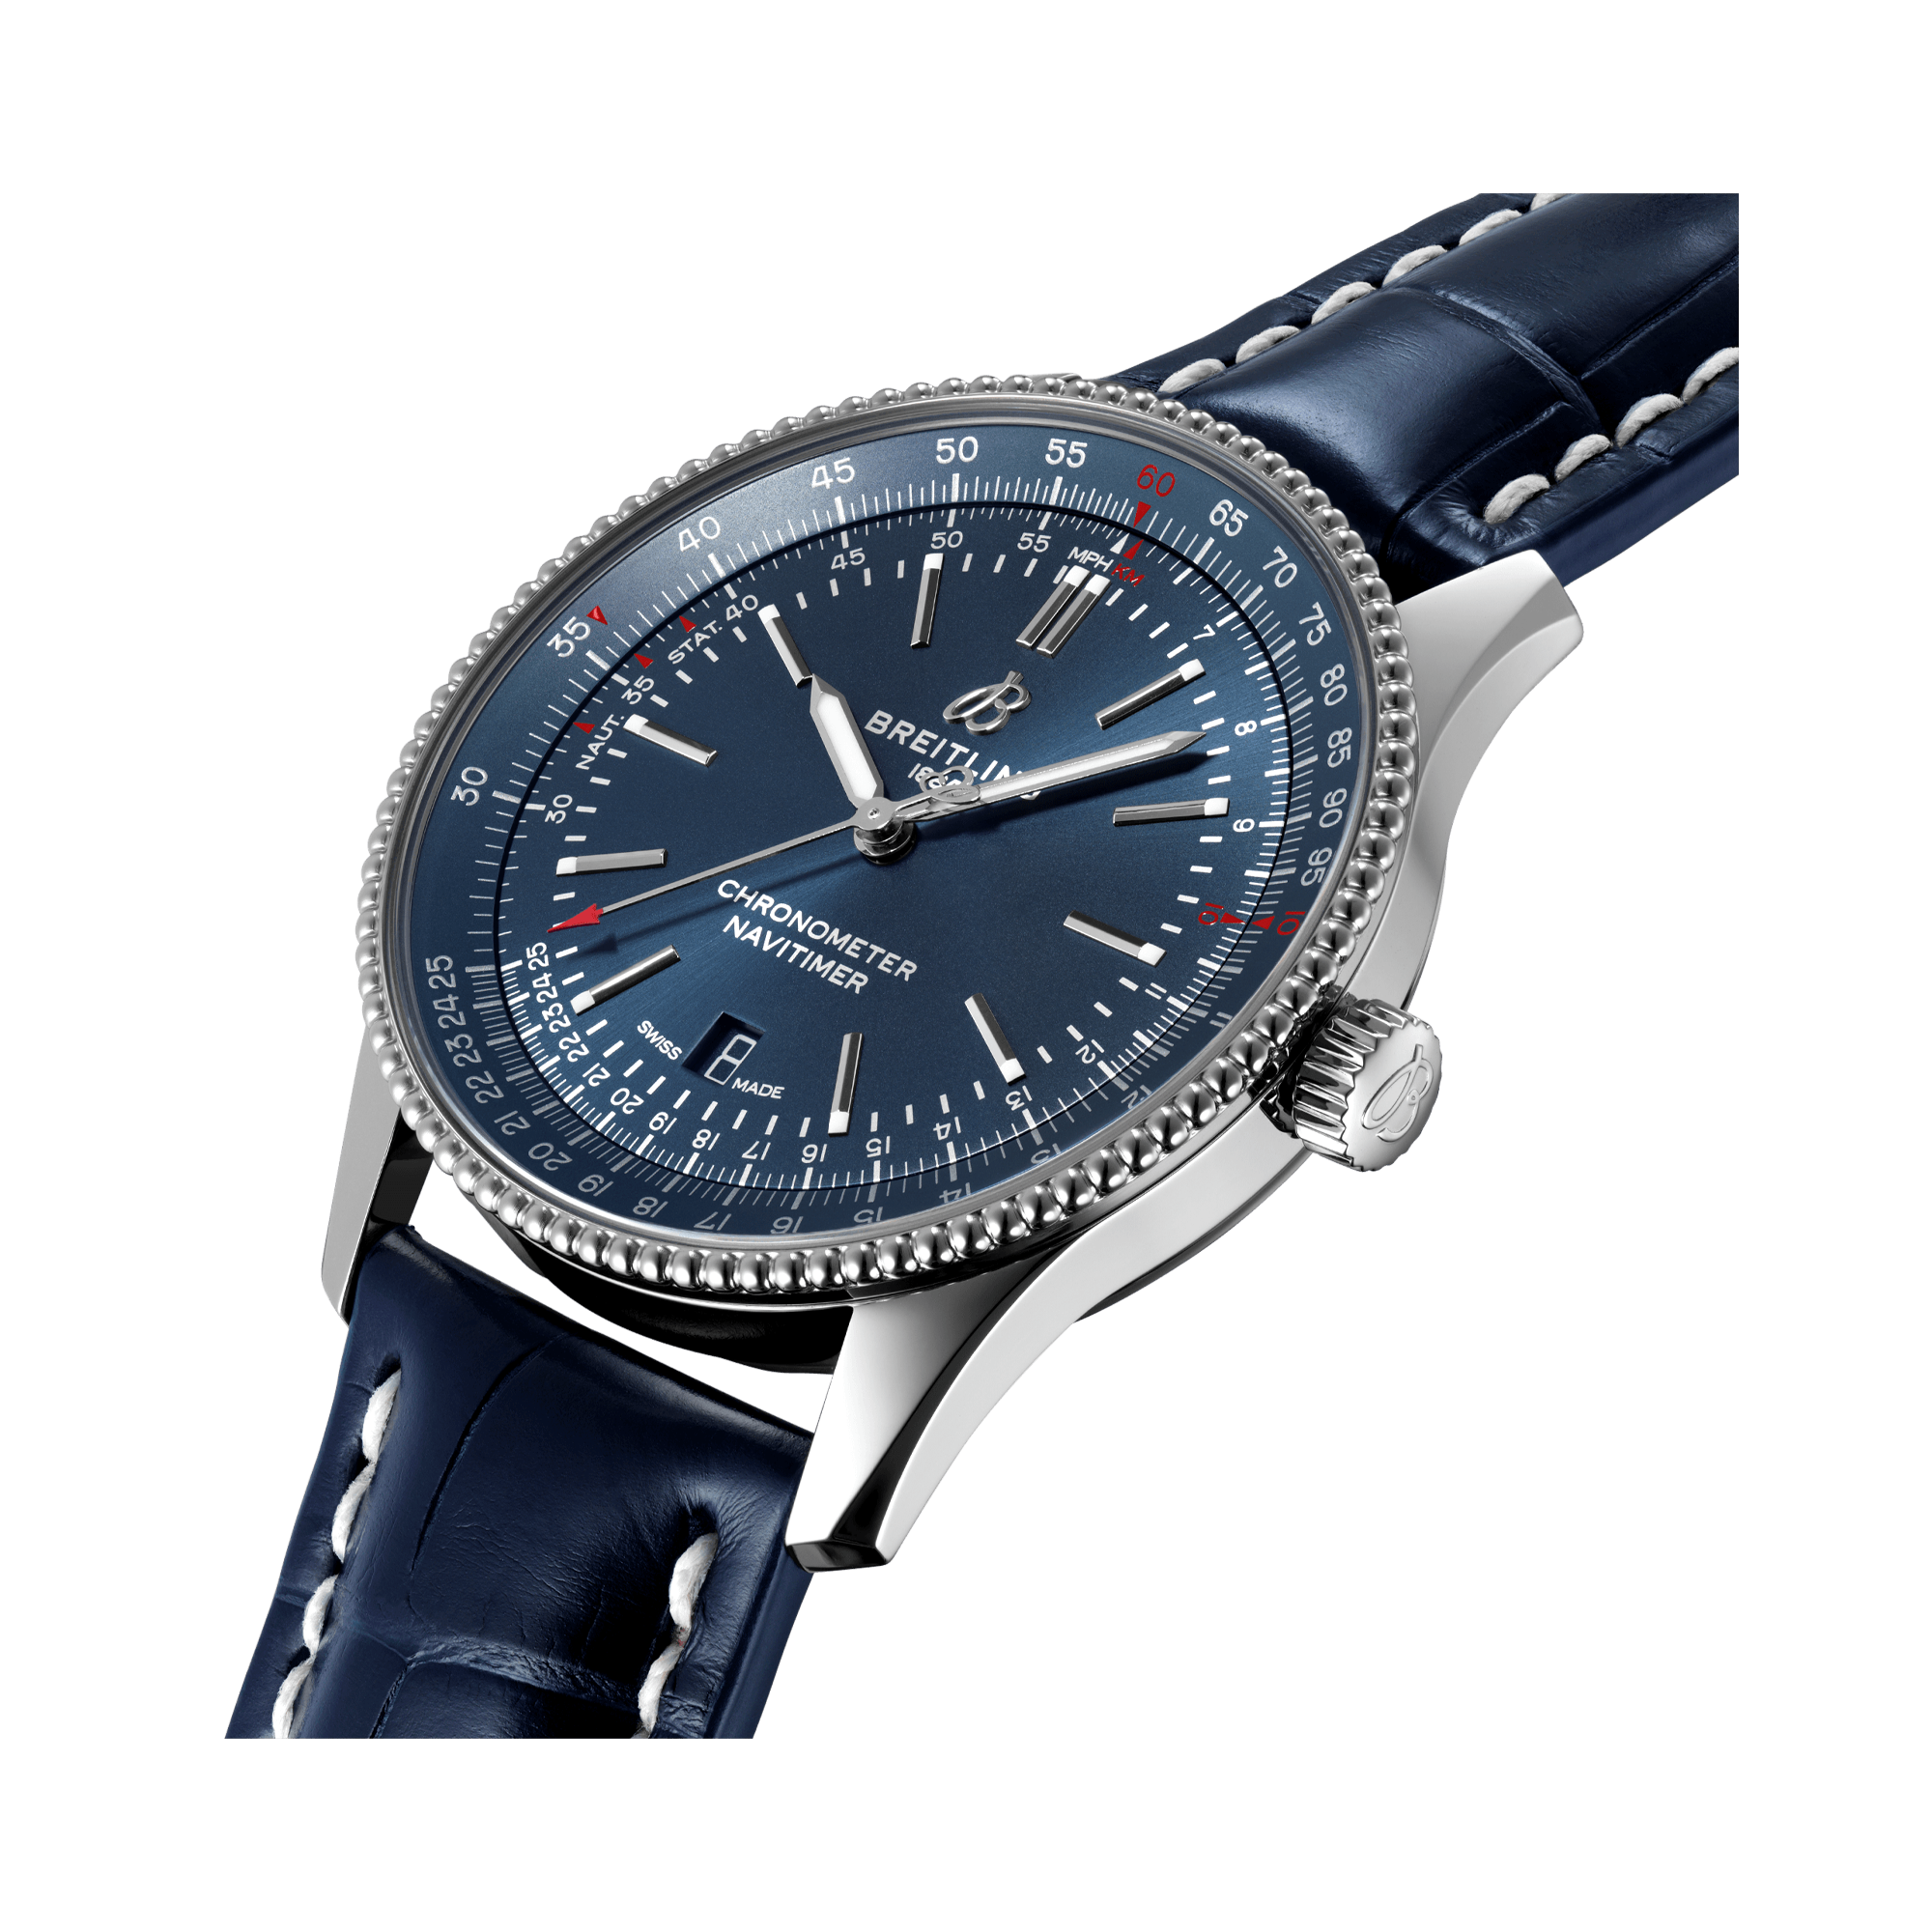 Breitling Navitimer Automatic 41 41mm, Blue Dial, Baton Numerals_2